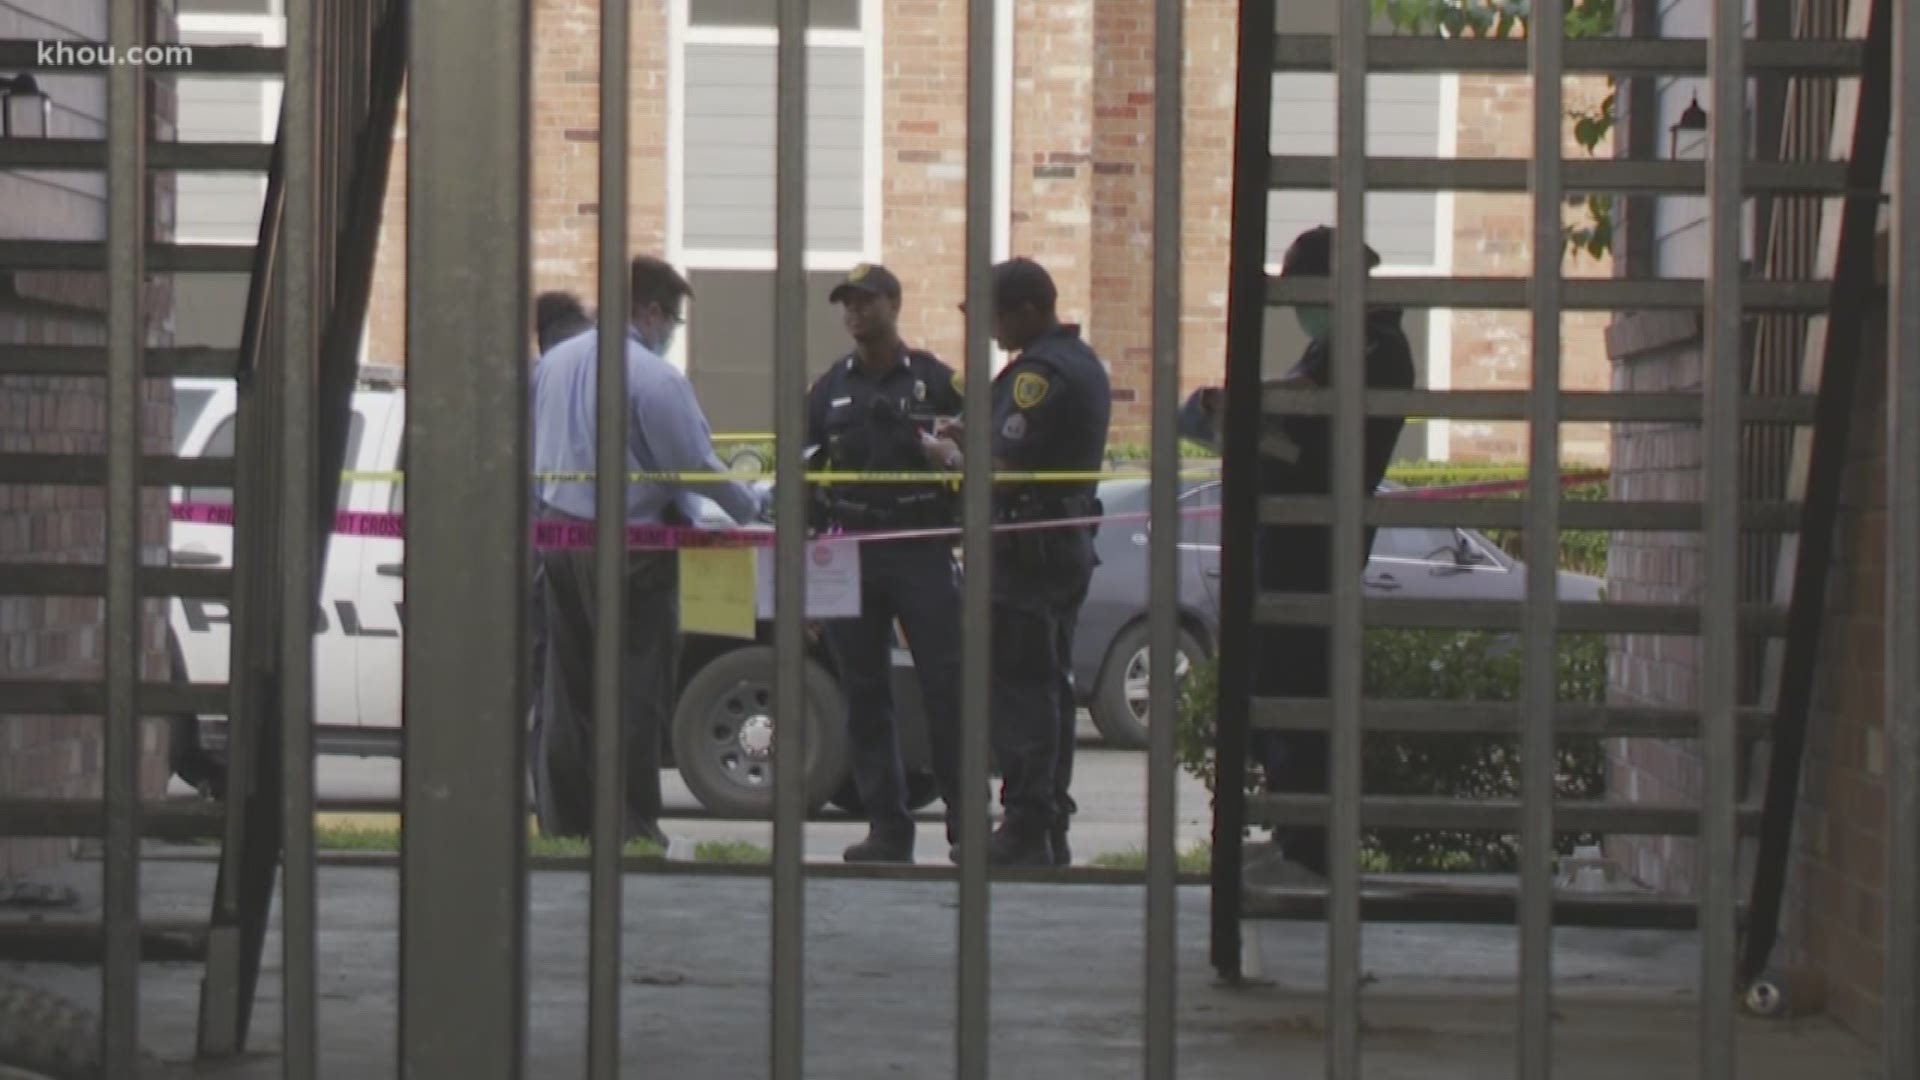 A woman was shot and killed by a security guard at an apartment complex in south Houston Monday afternoon, according to the Houston Police Department.